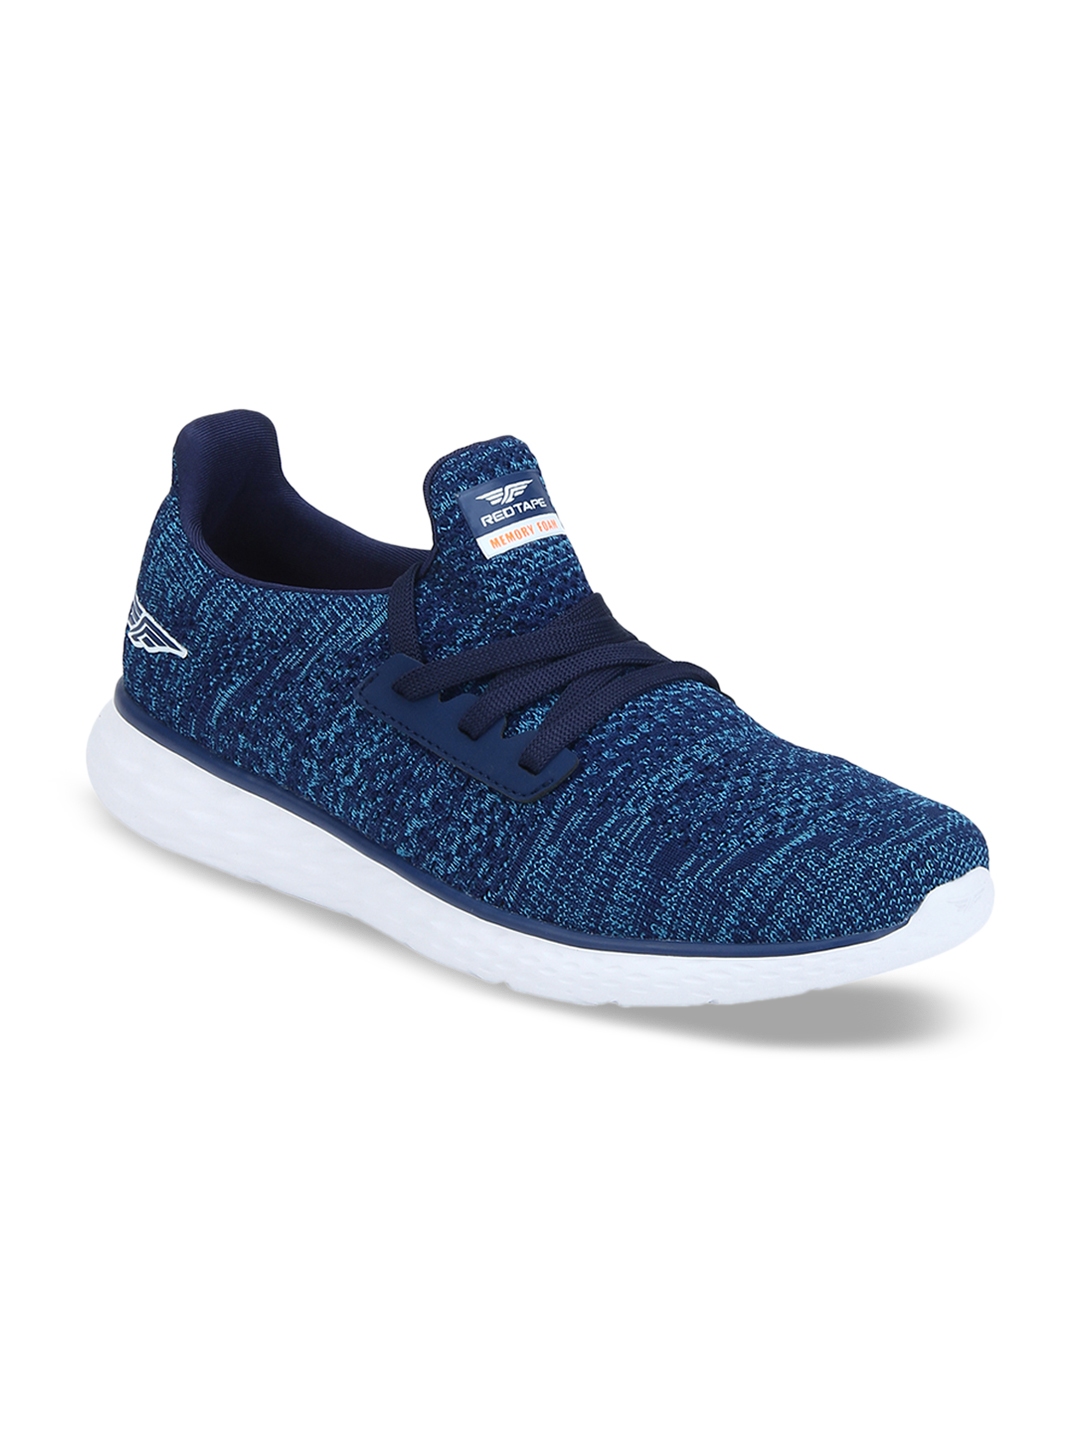 Buy Red Tape Athleisure Sports Range Men Blue Running Shoes - Sports ...